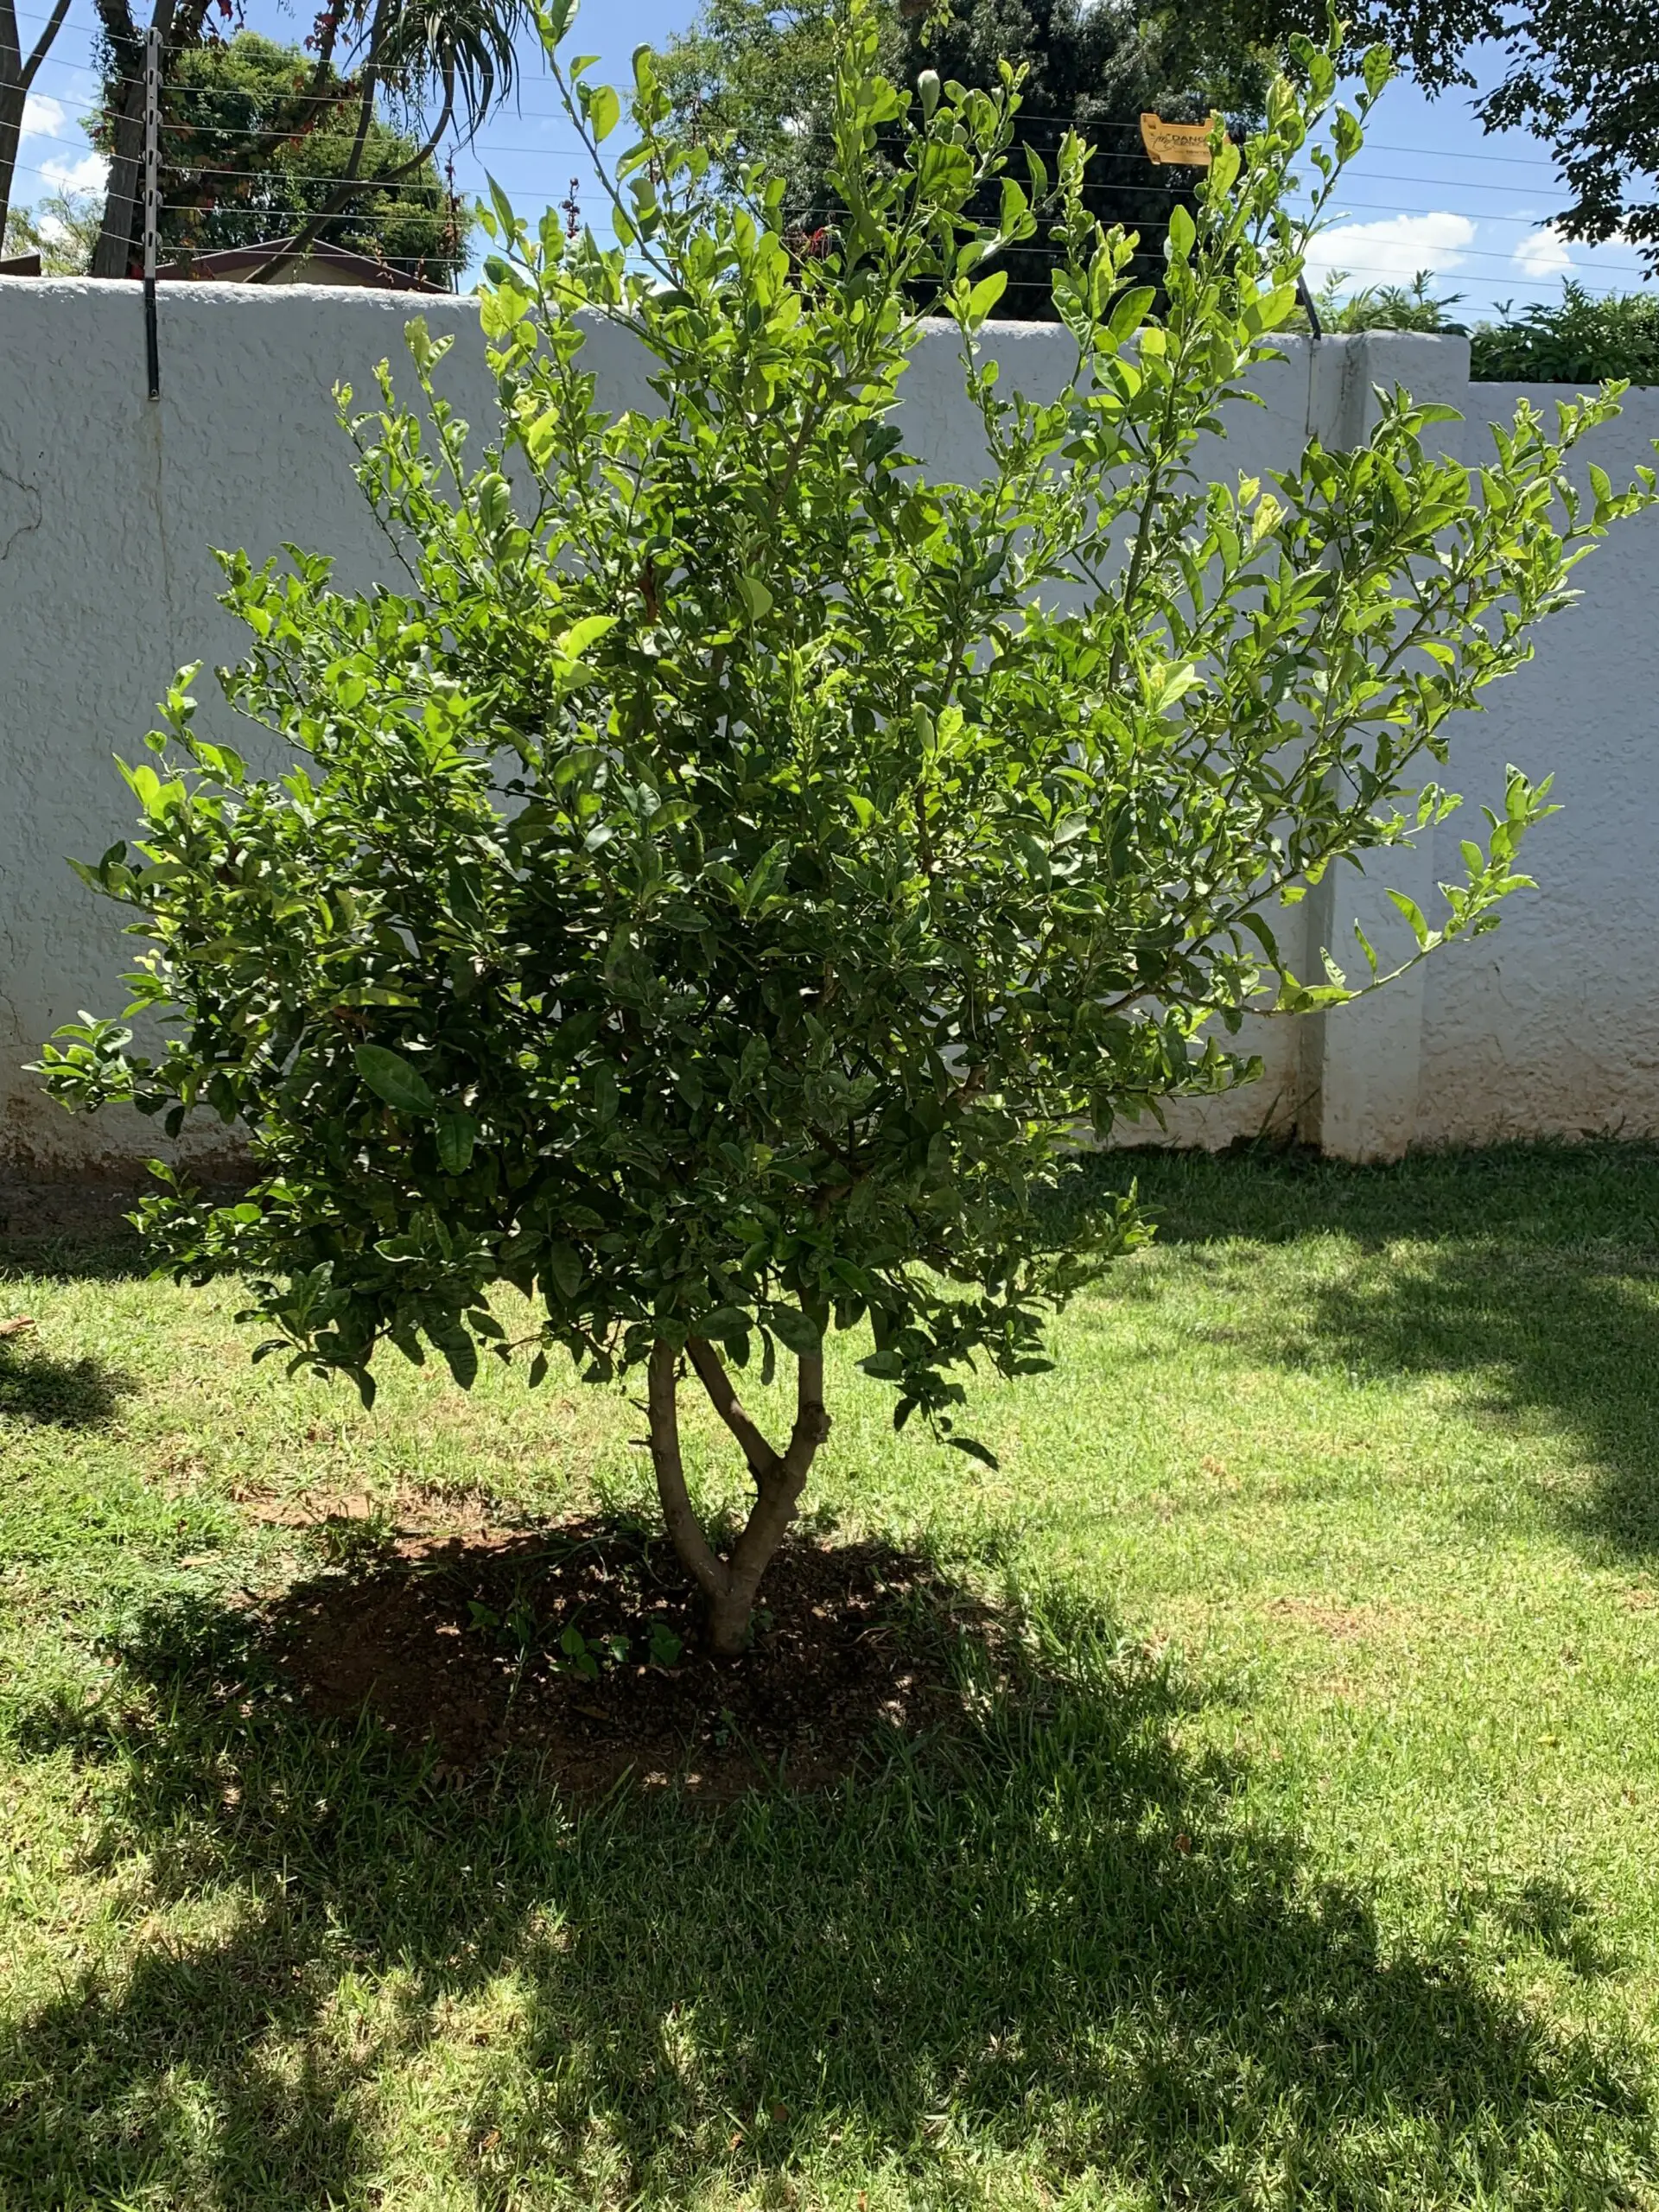 Growing Citrus Bliss: A Young Lemon Tree Thriving in the Backyard